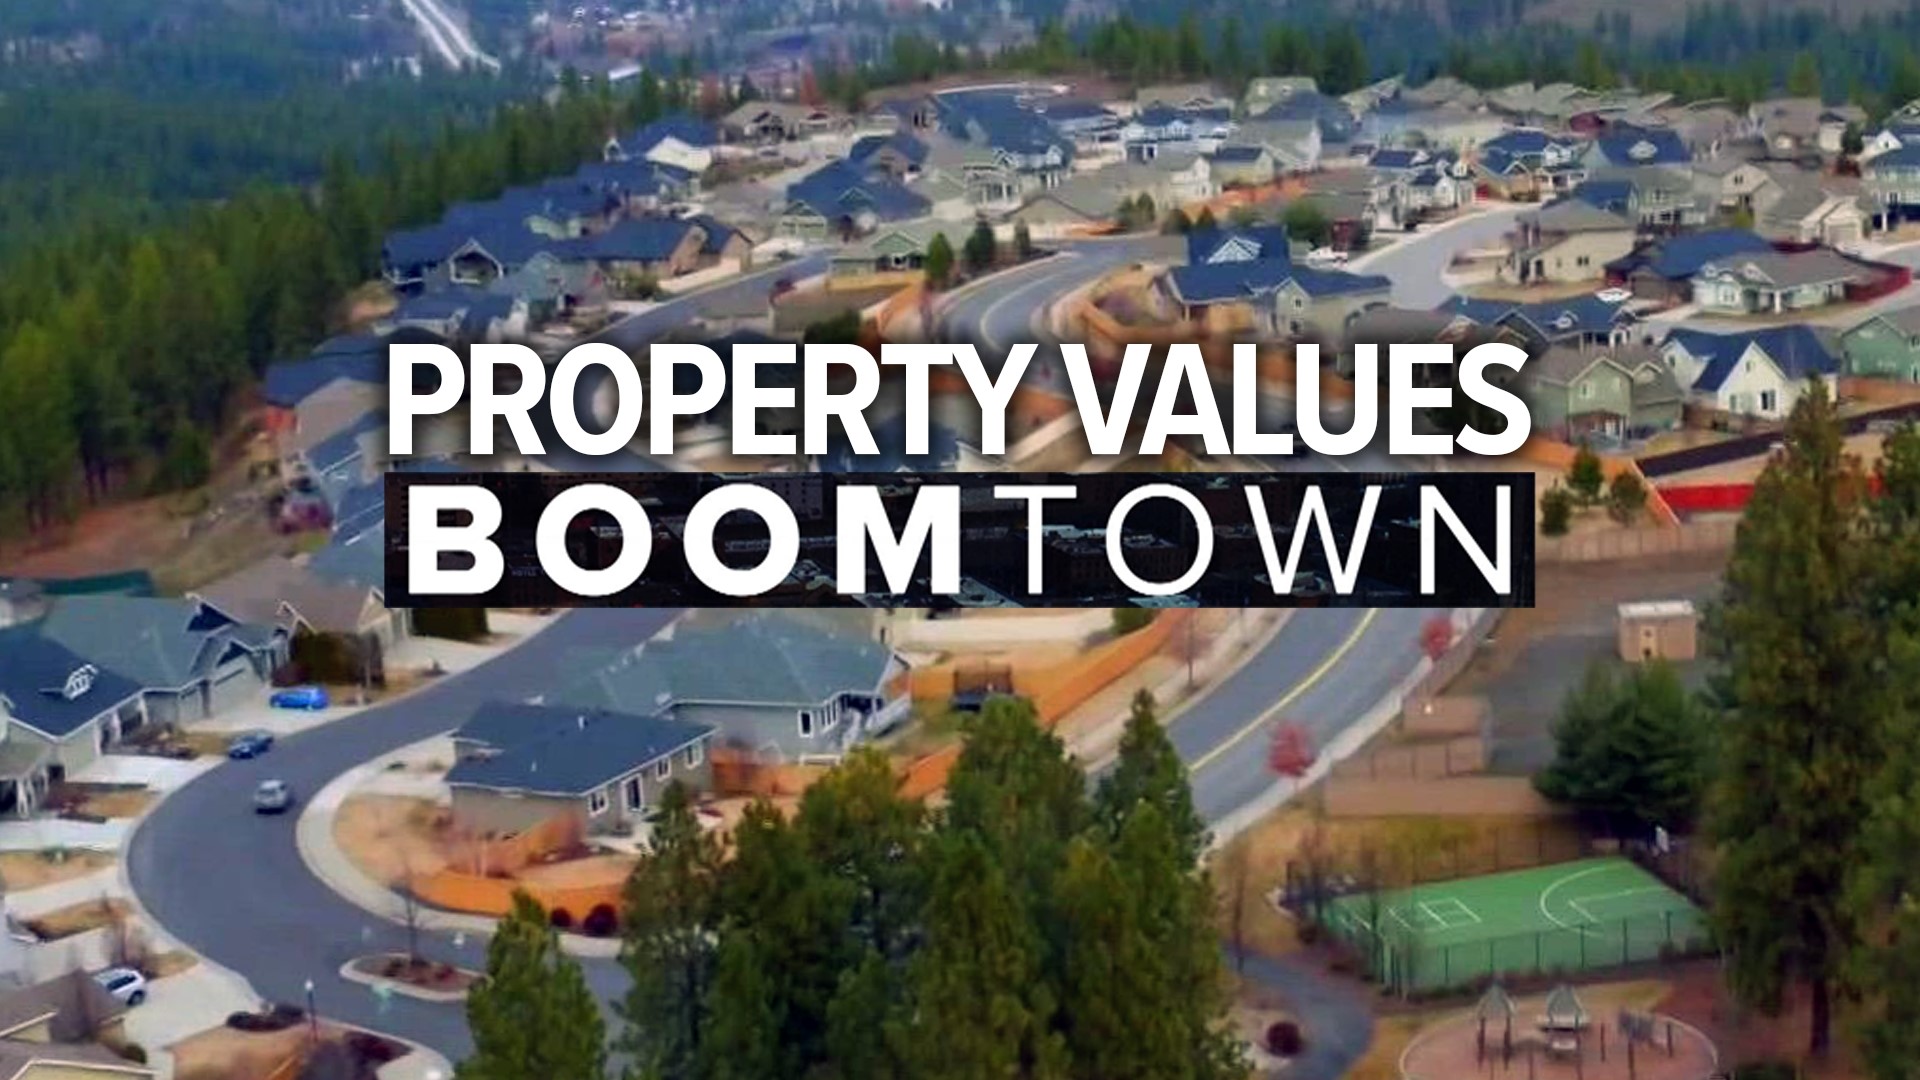 Spokane County Assessor Tom Konis said he has never seen such a stark increase in home prices.